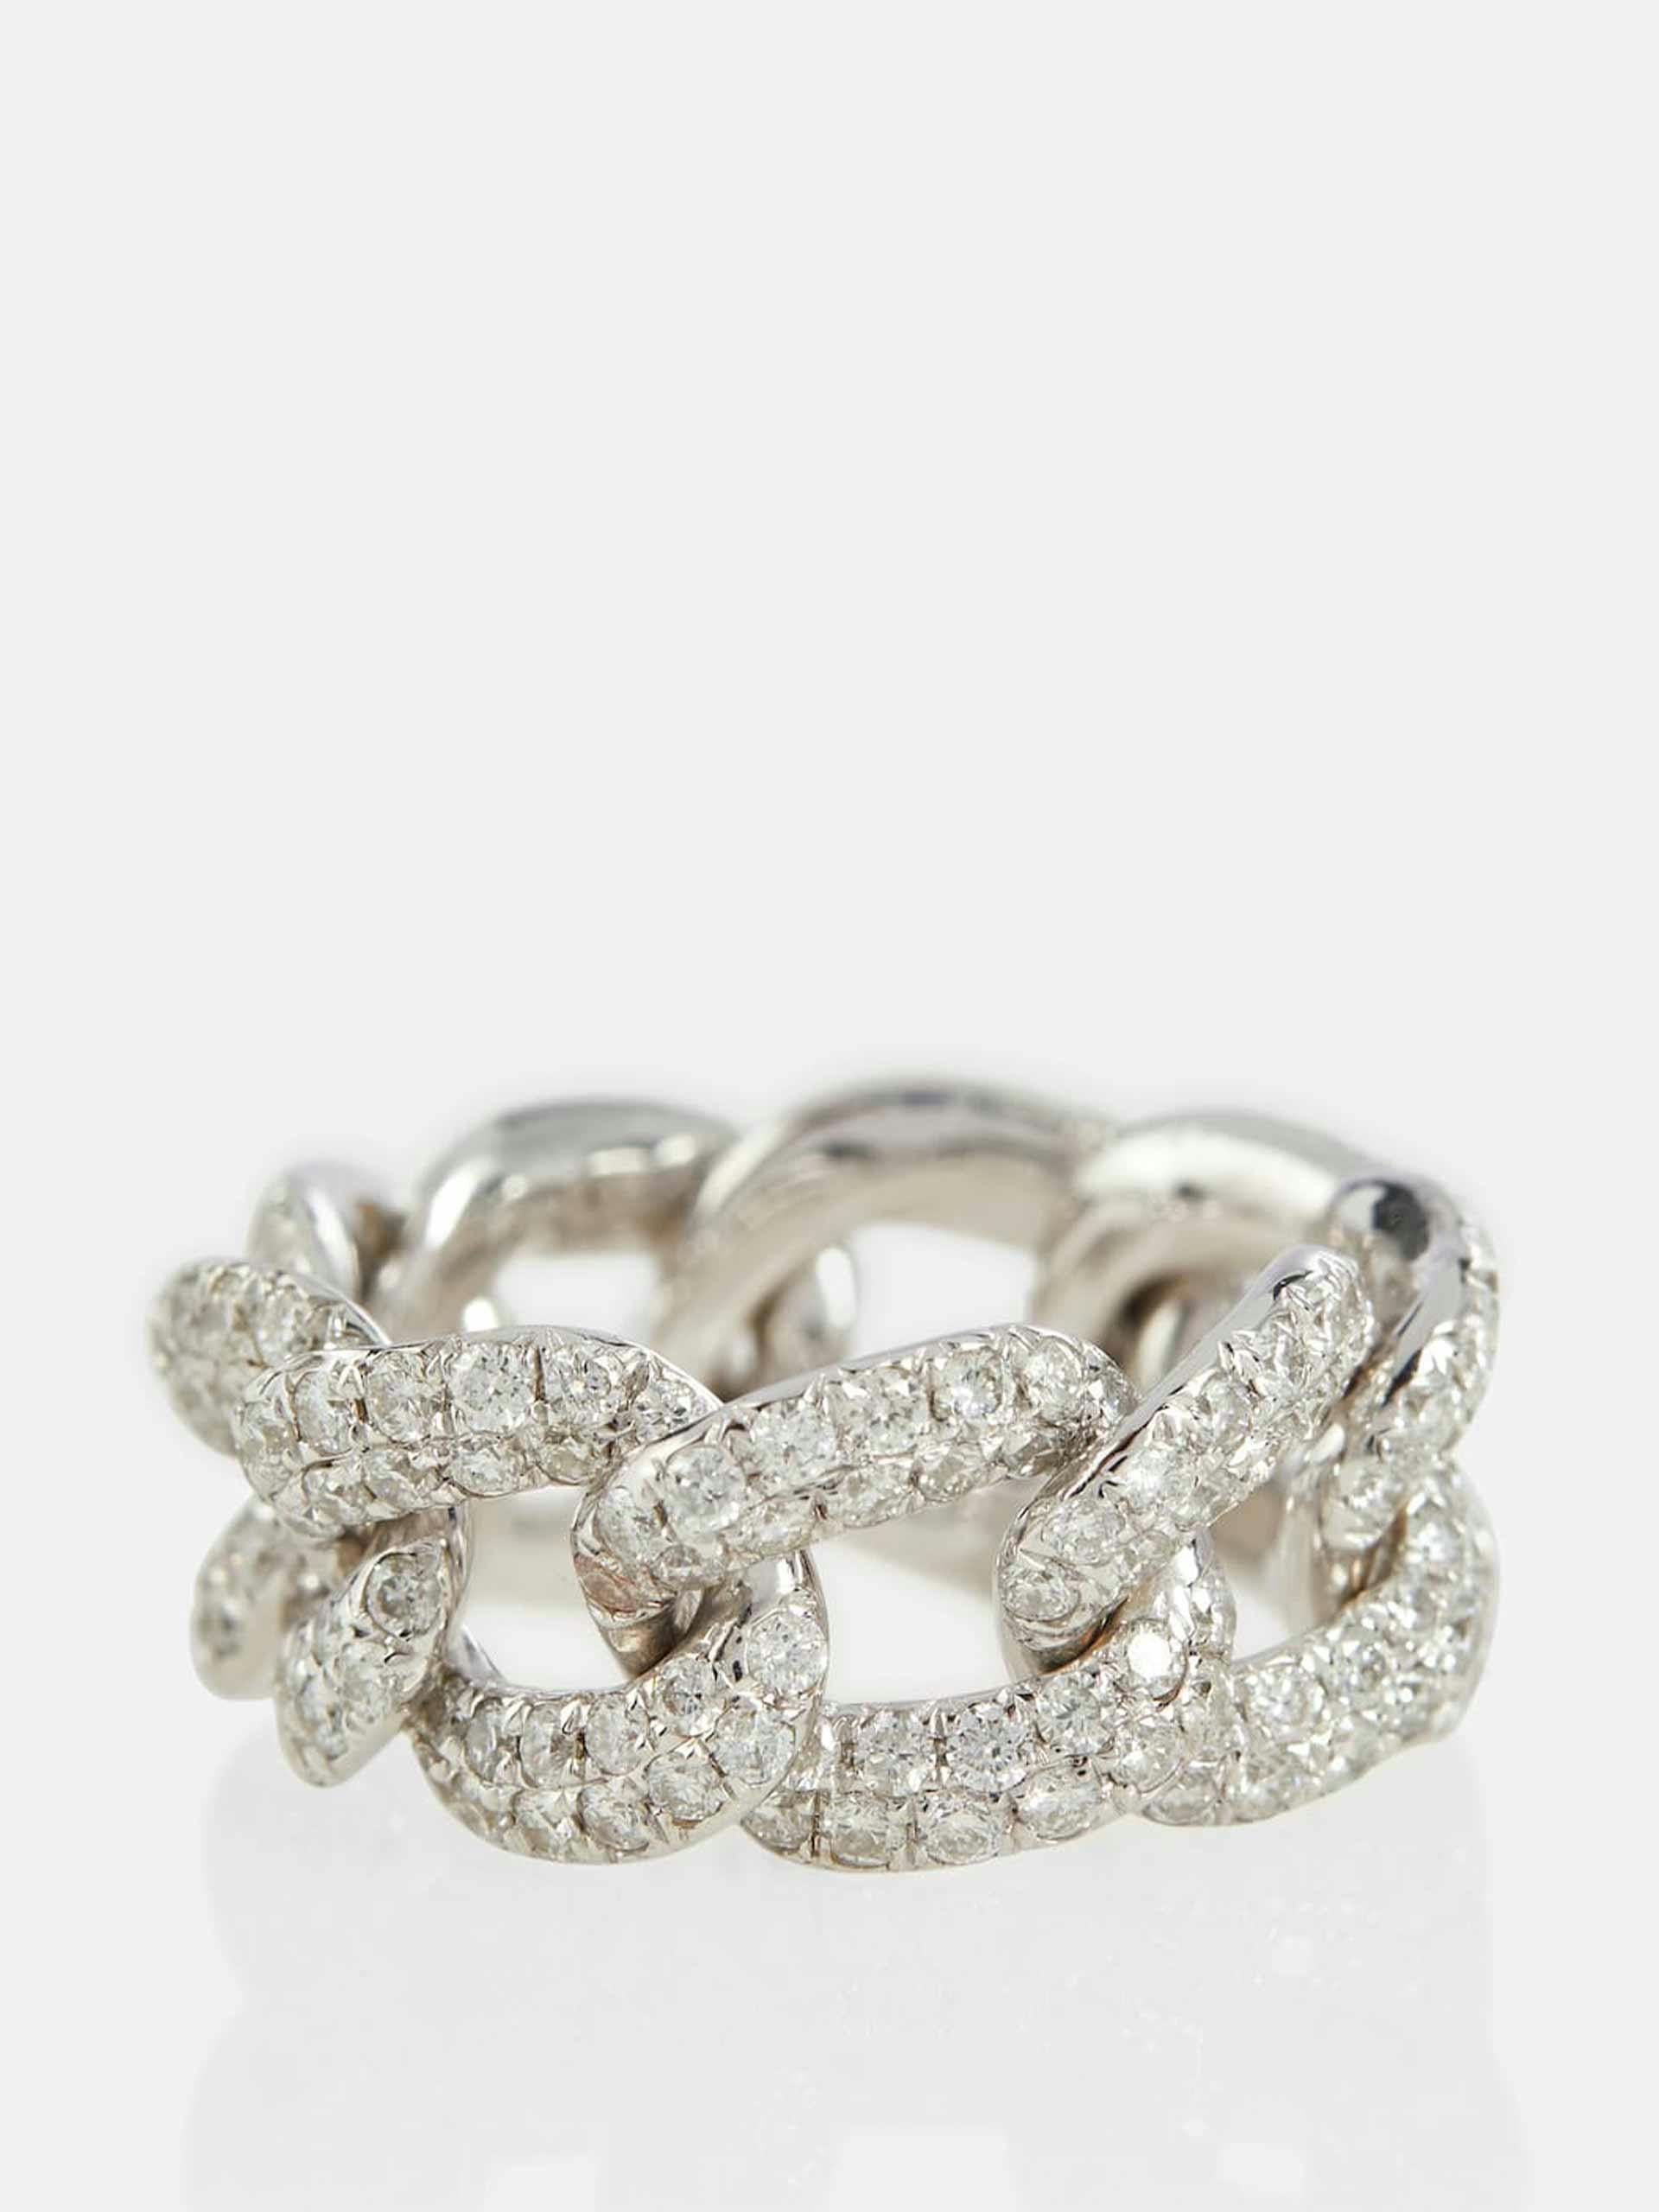 18 Kt White Gold pave ring with diamonds